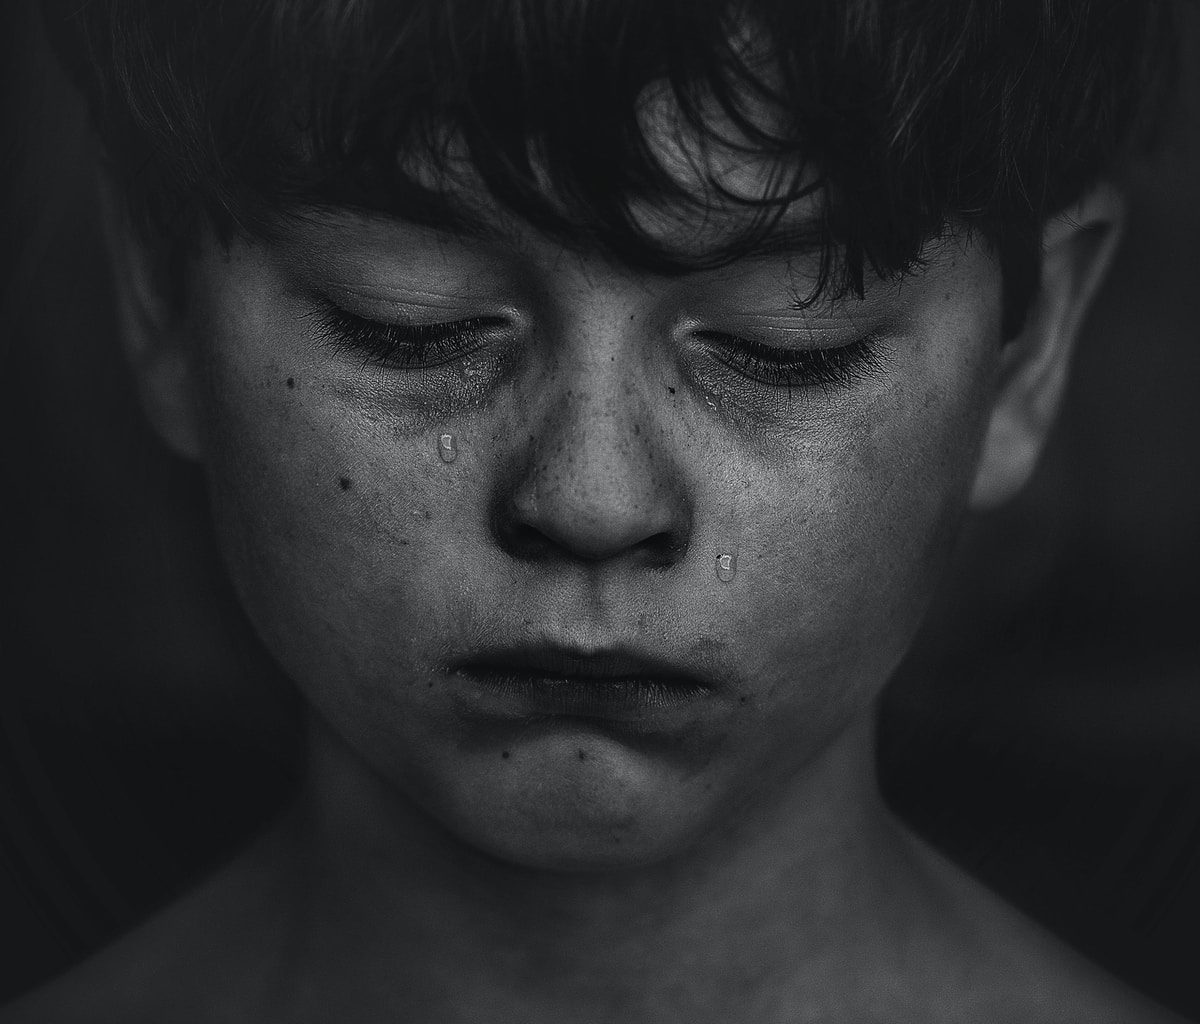 a boy crying tears for his loss